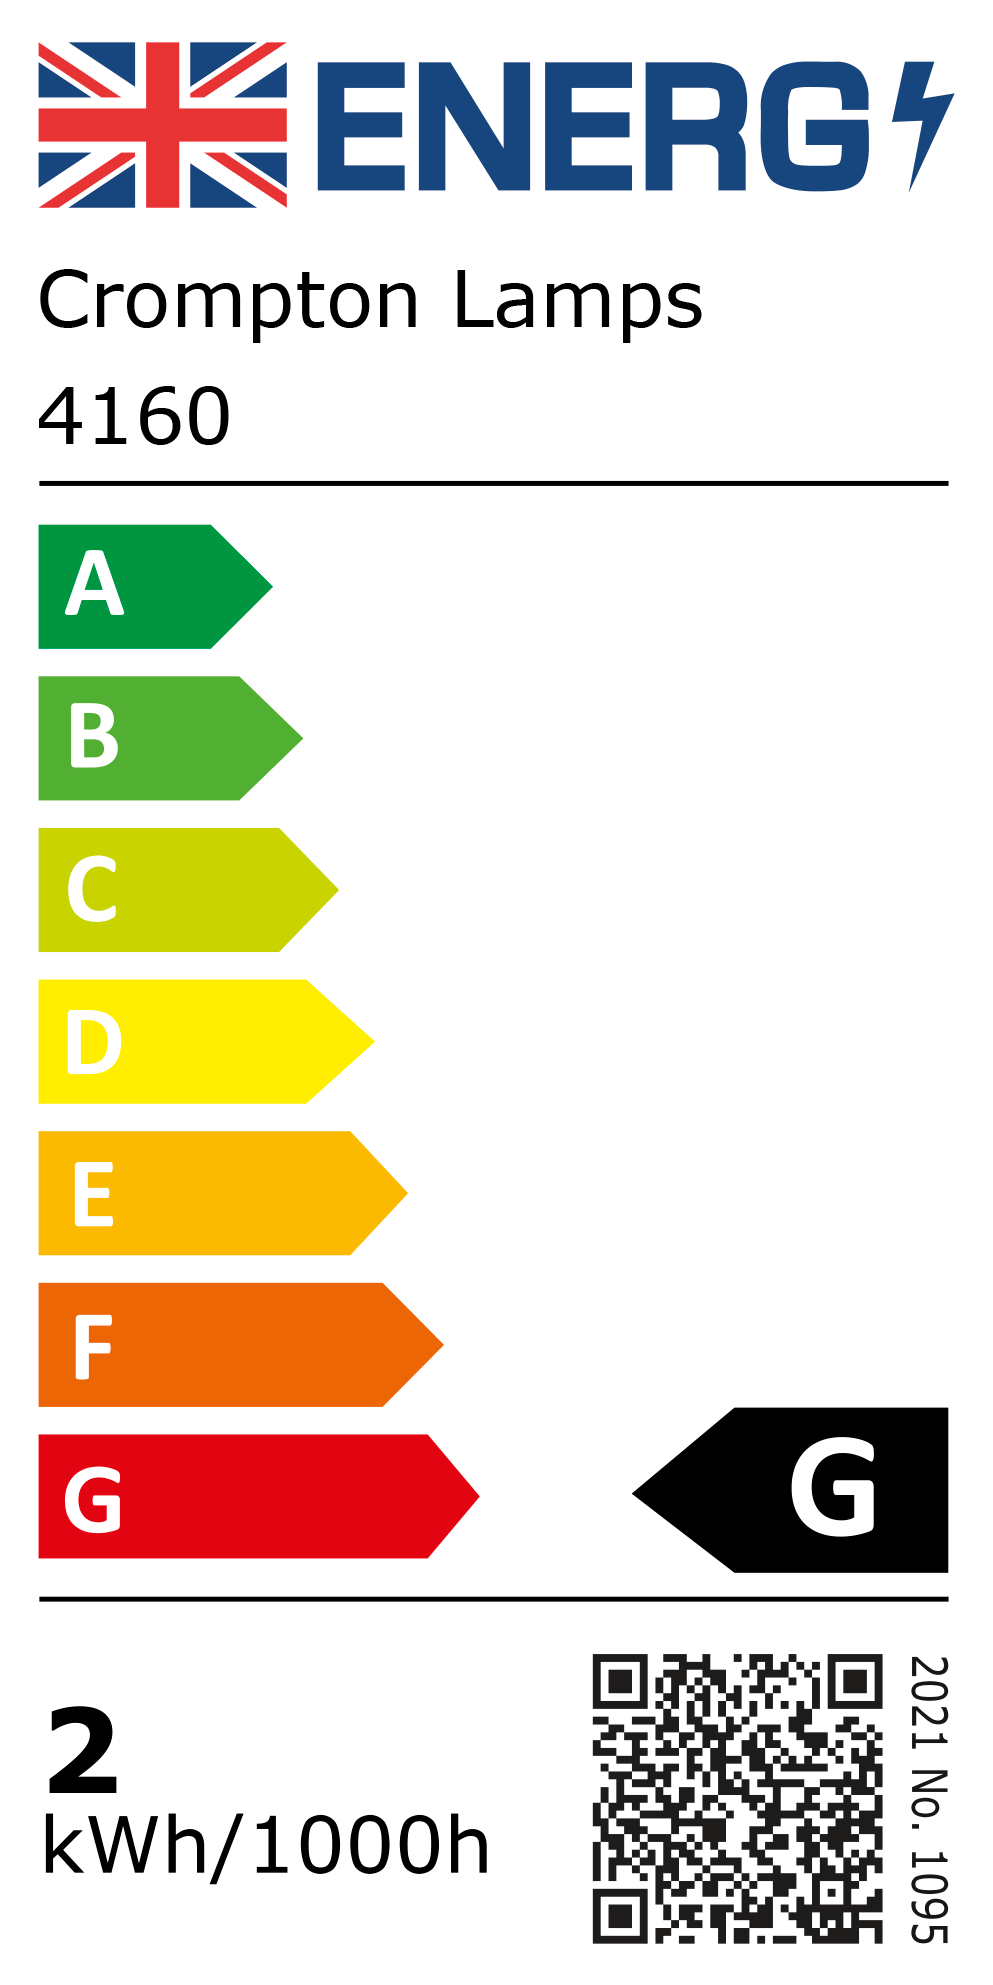 New 2021 Energy Rating Label: Stock Code 4160